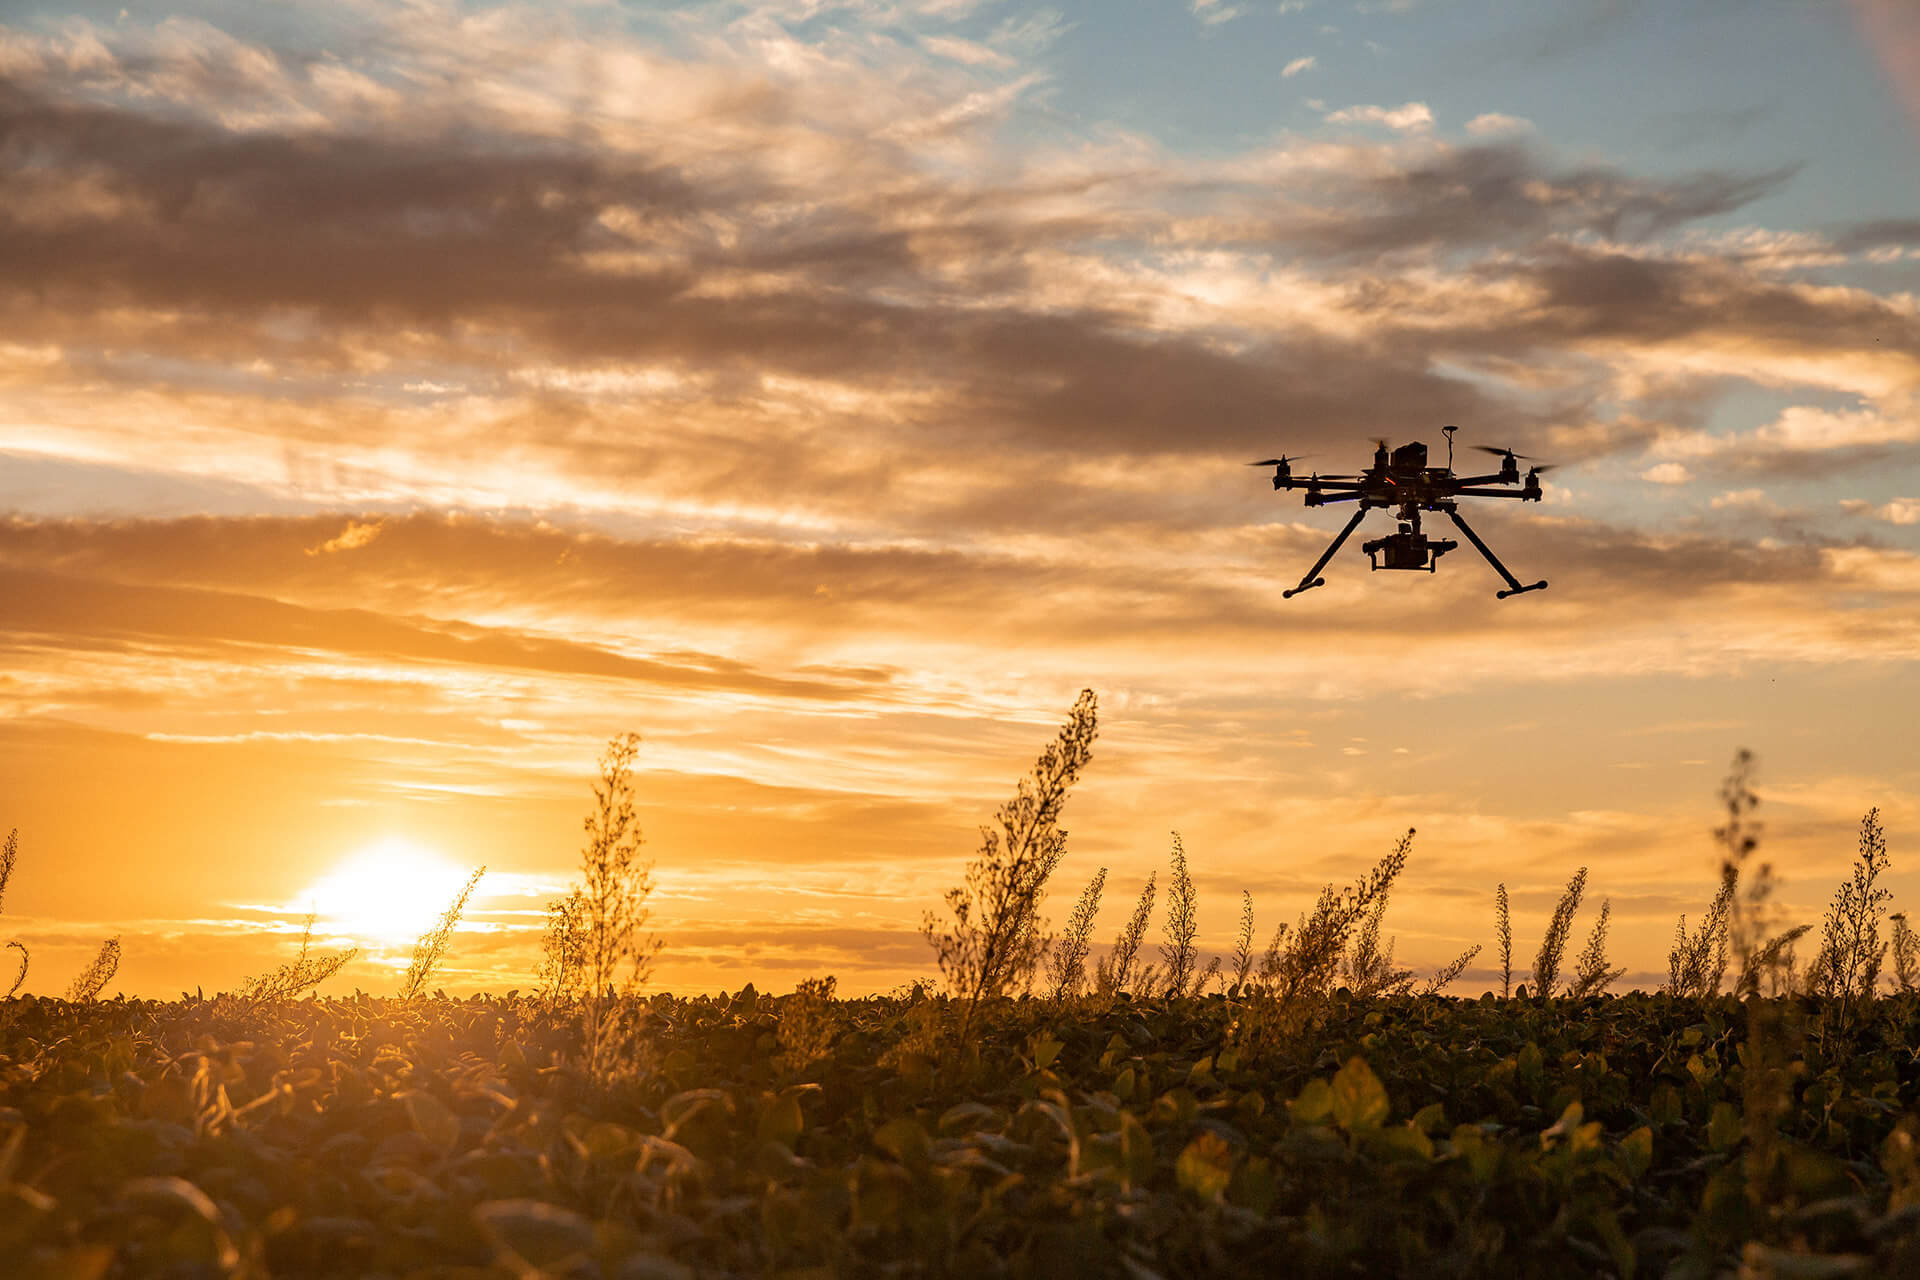 A drone hovers over a field of soy beans at sunset